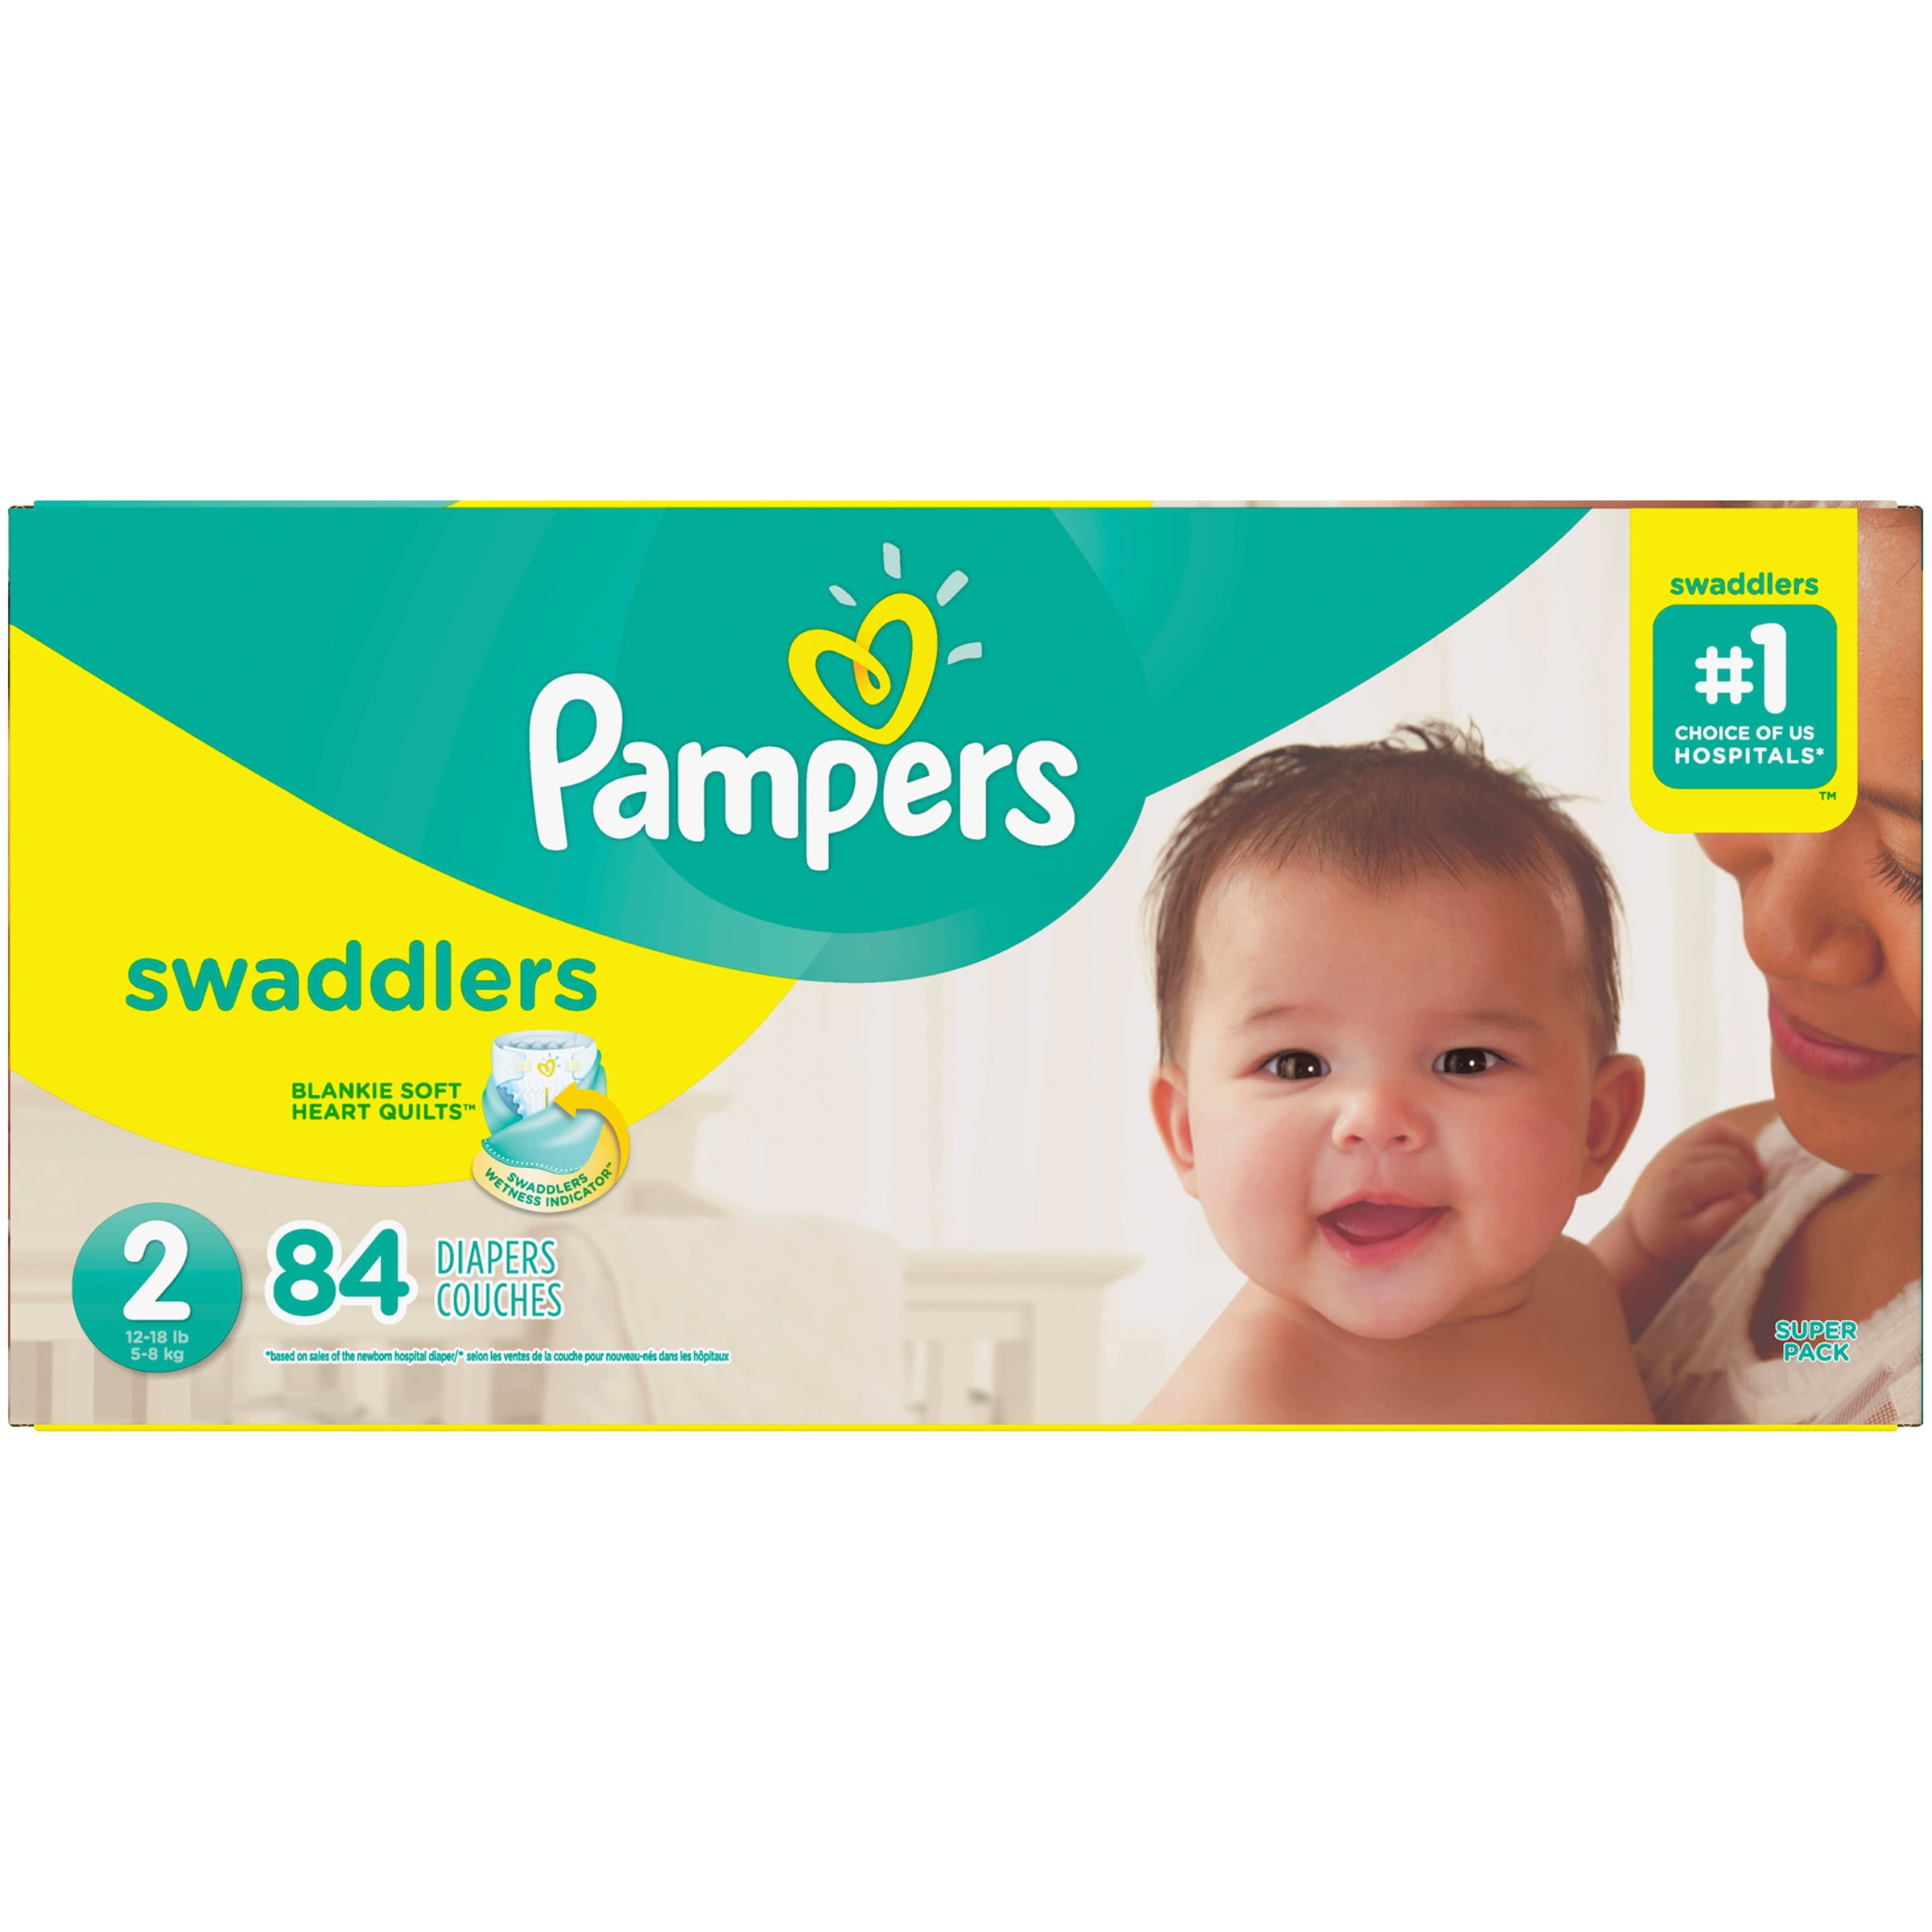 Pampers Swaddlers Diapers, Super Pack, Size 2, 84 Count - Walmart.com